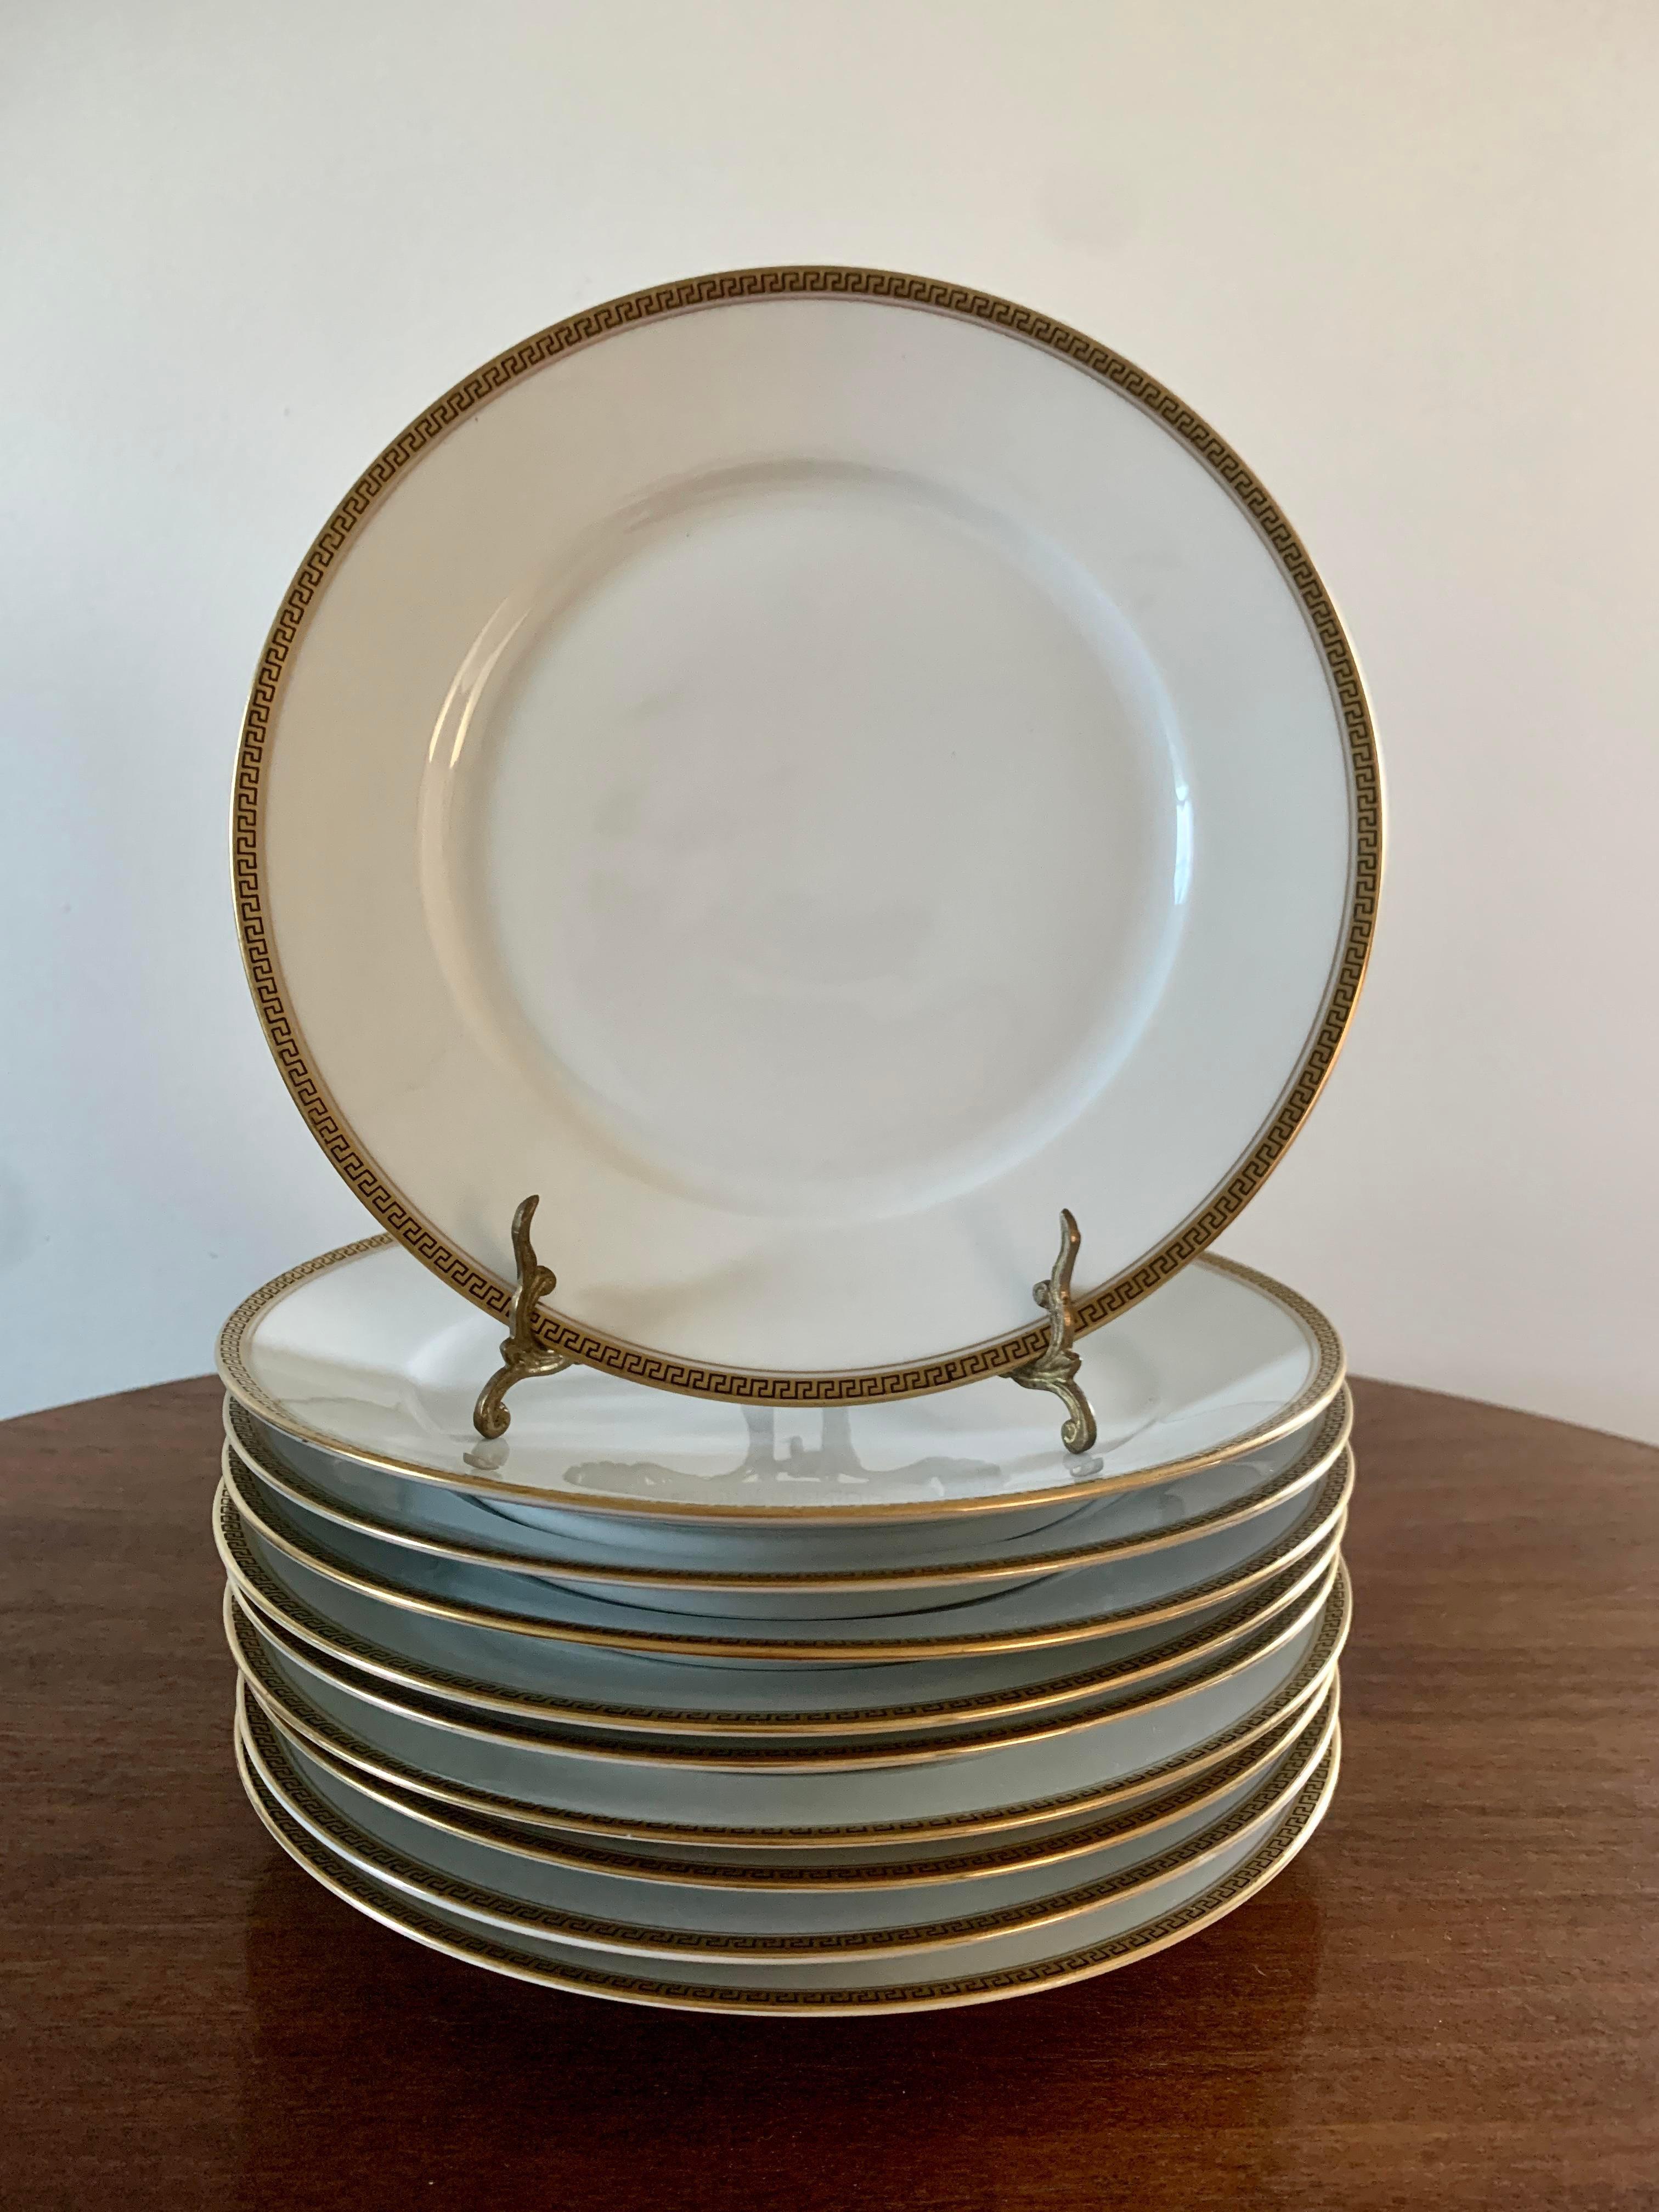 Early 20th Century Antique German Greek Key Rimmed Luncheon Plates by Kpm, 1920s For Sale